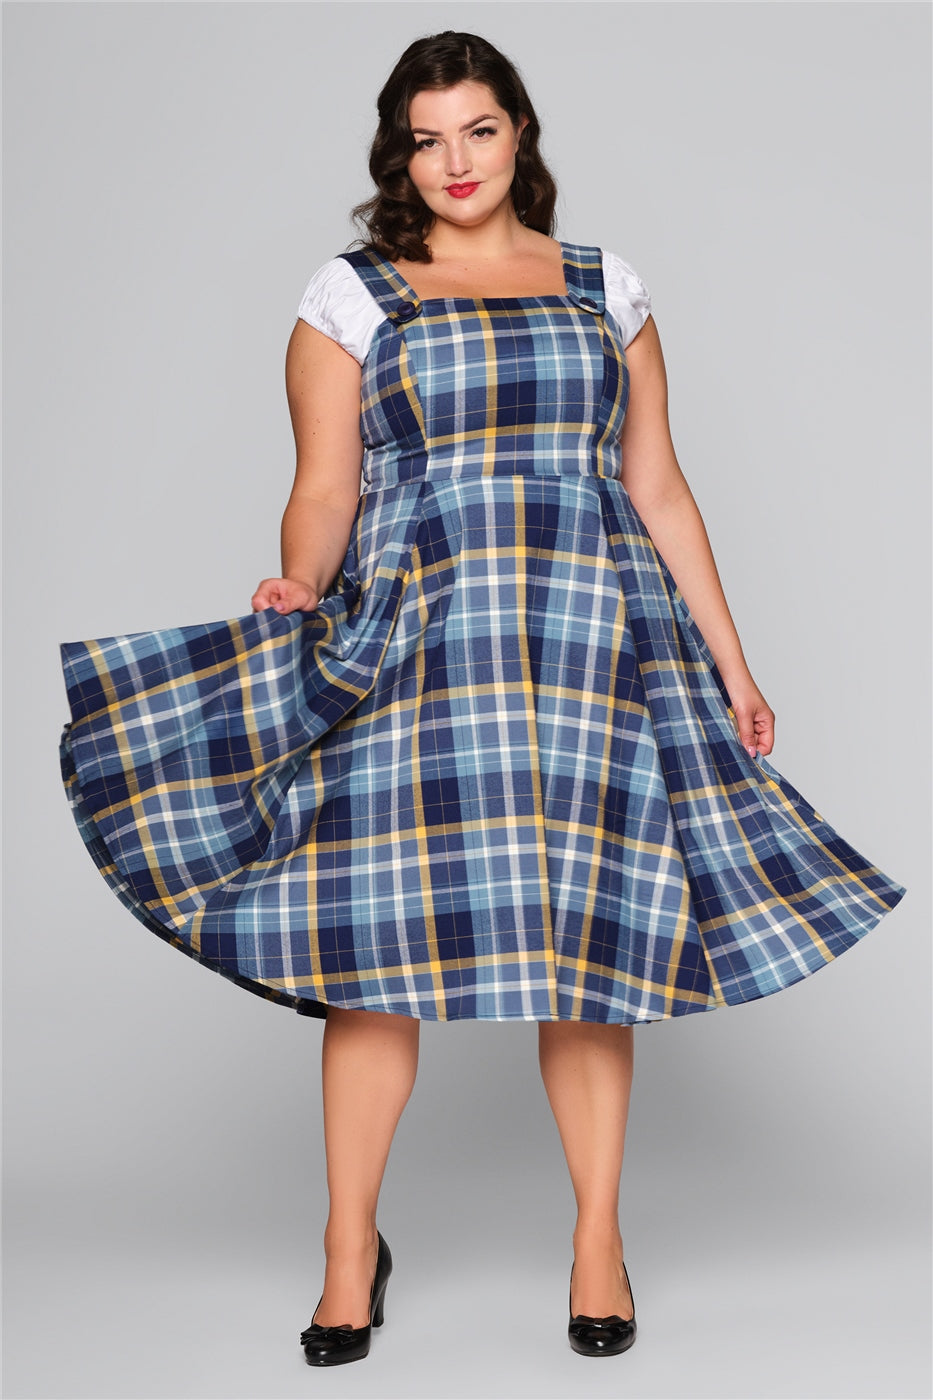 Eloise Moonlight Check Swing Dress by Collectif